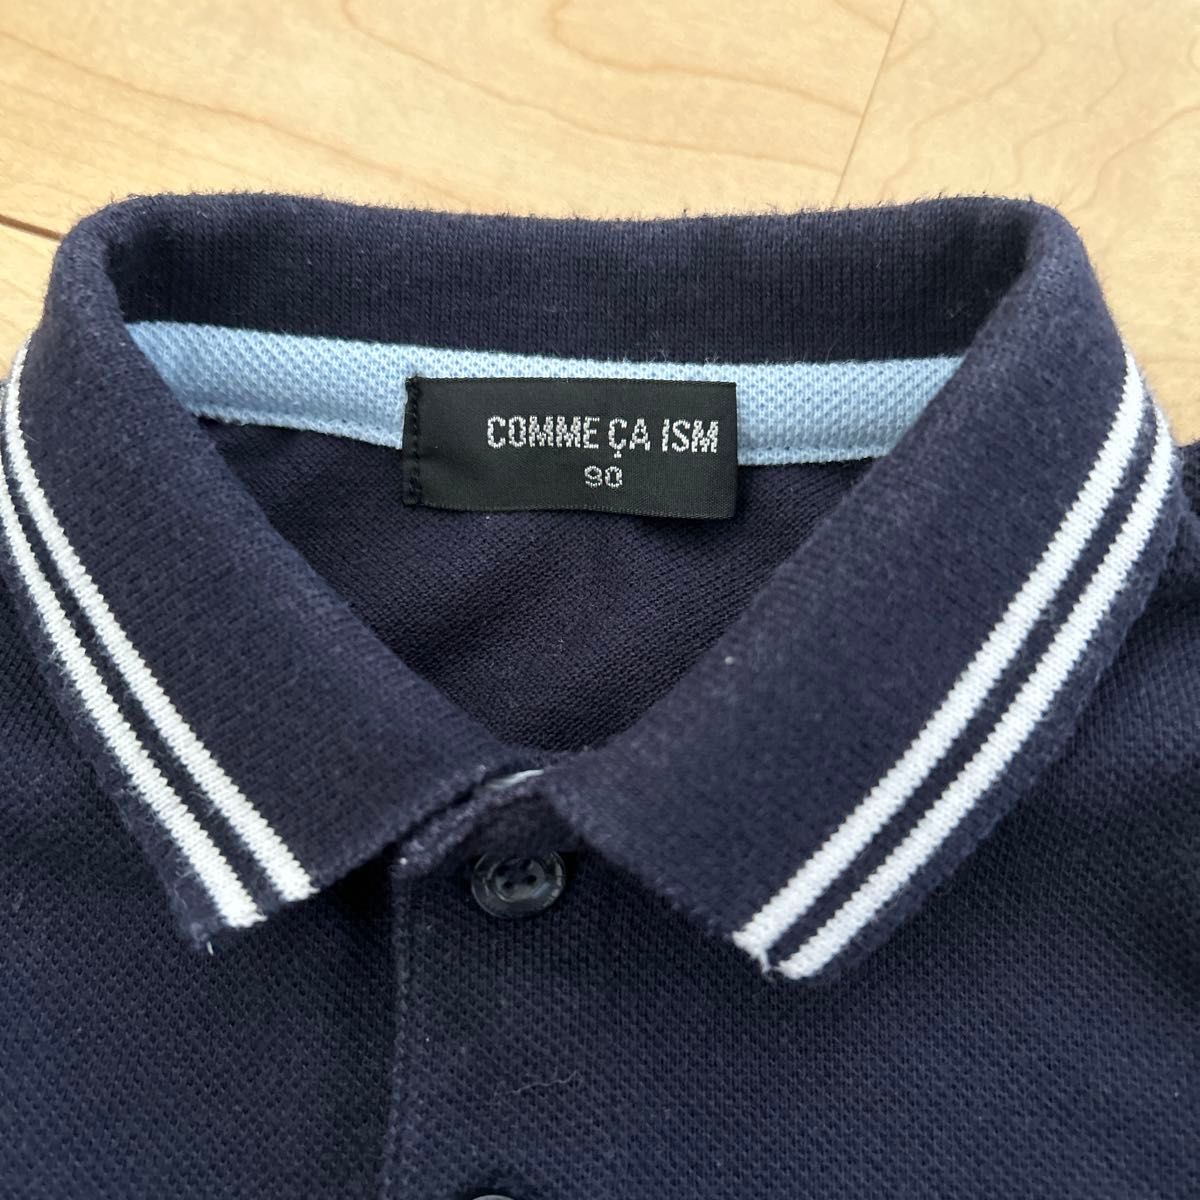 COMME CA ISMポロシャツ90size